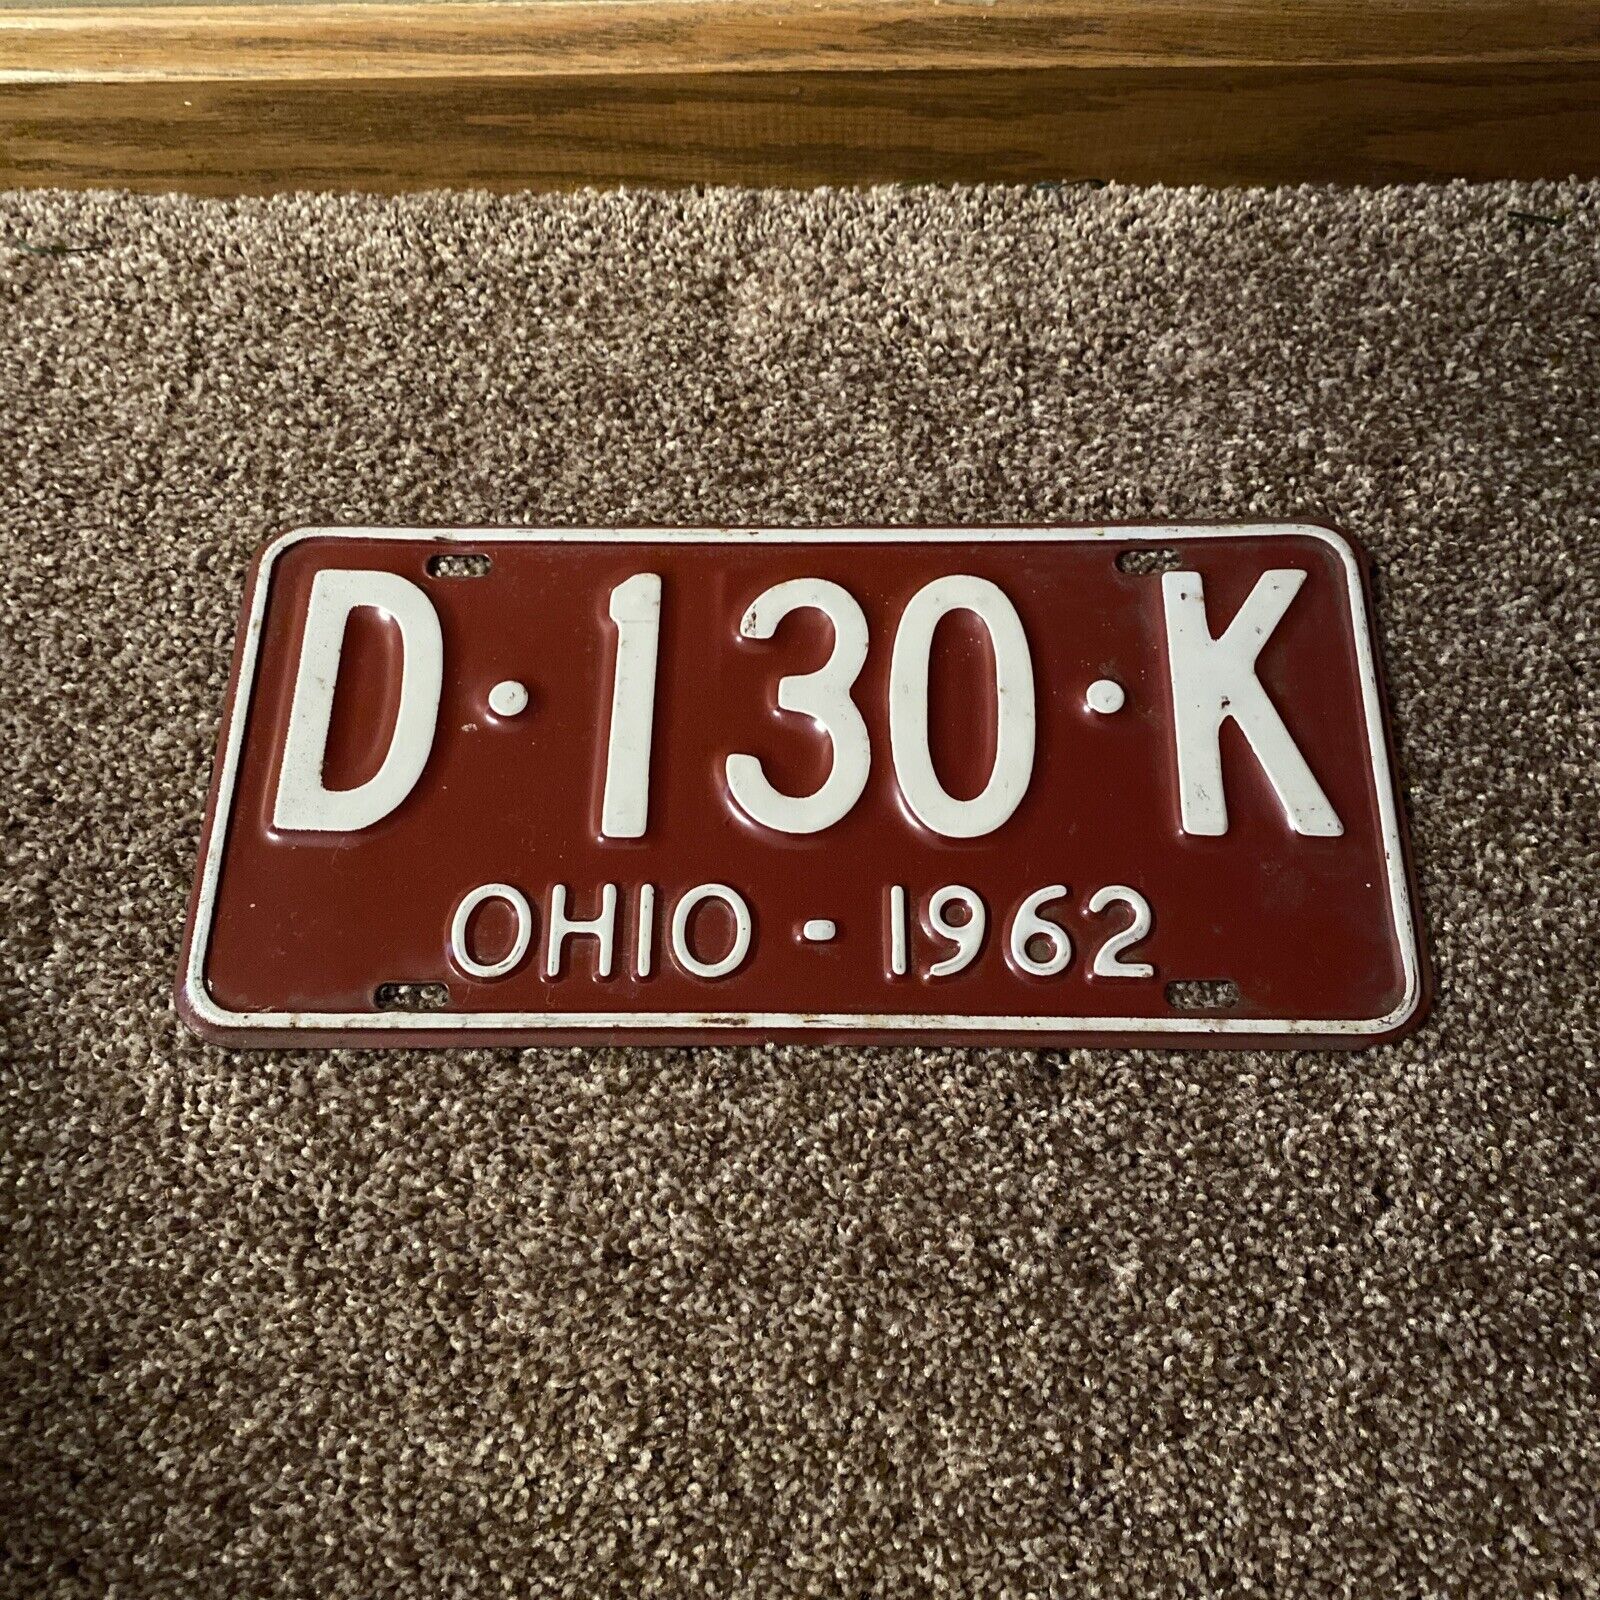 (1) Trendy Vintage 1962 Ohio State License Plate Red Excellent Condition